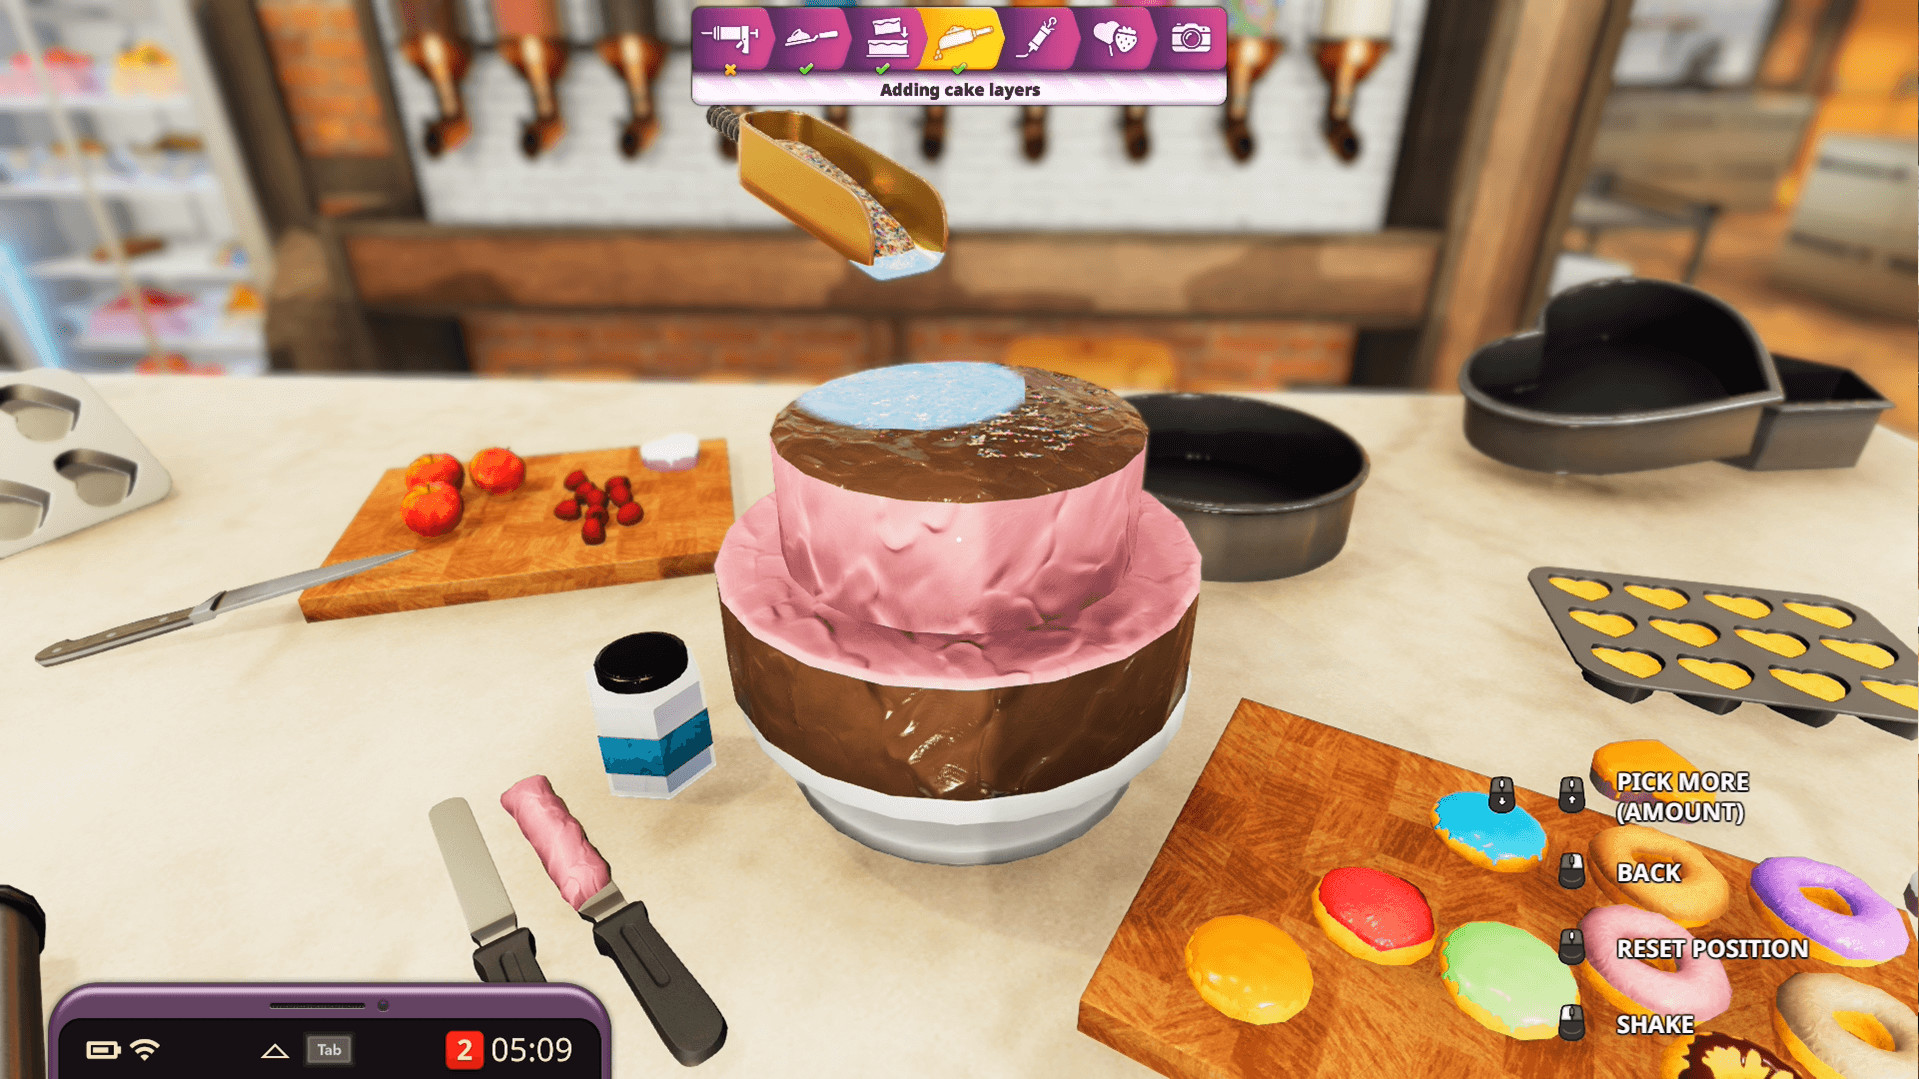 Let's make a pizza in Cooking Simulator VR 